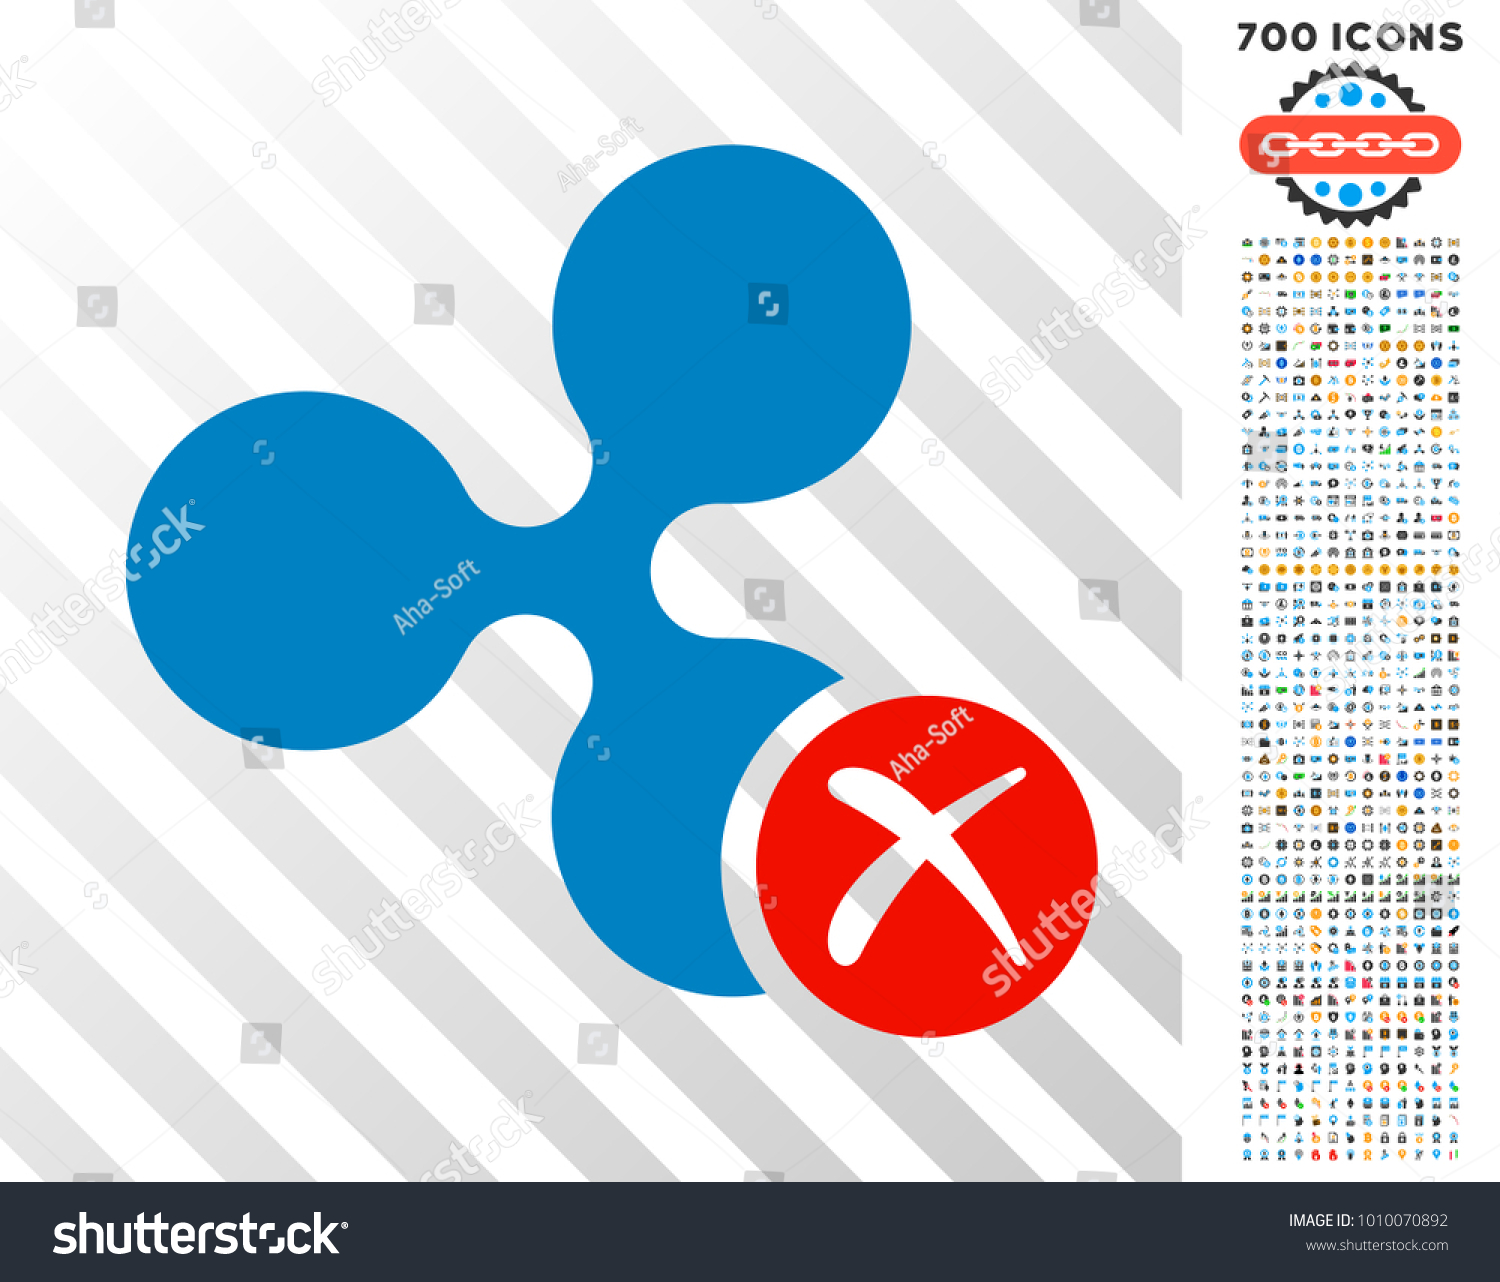 7 things nobody tells you about Ripple